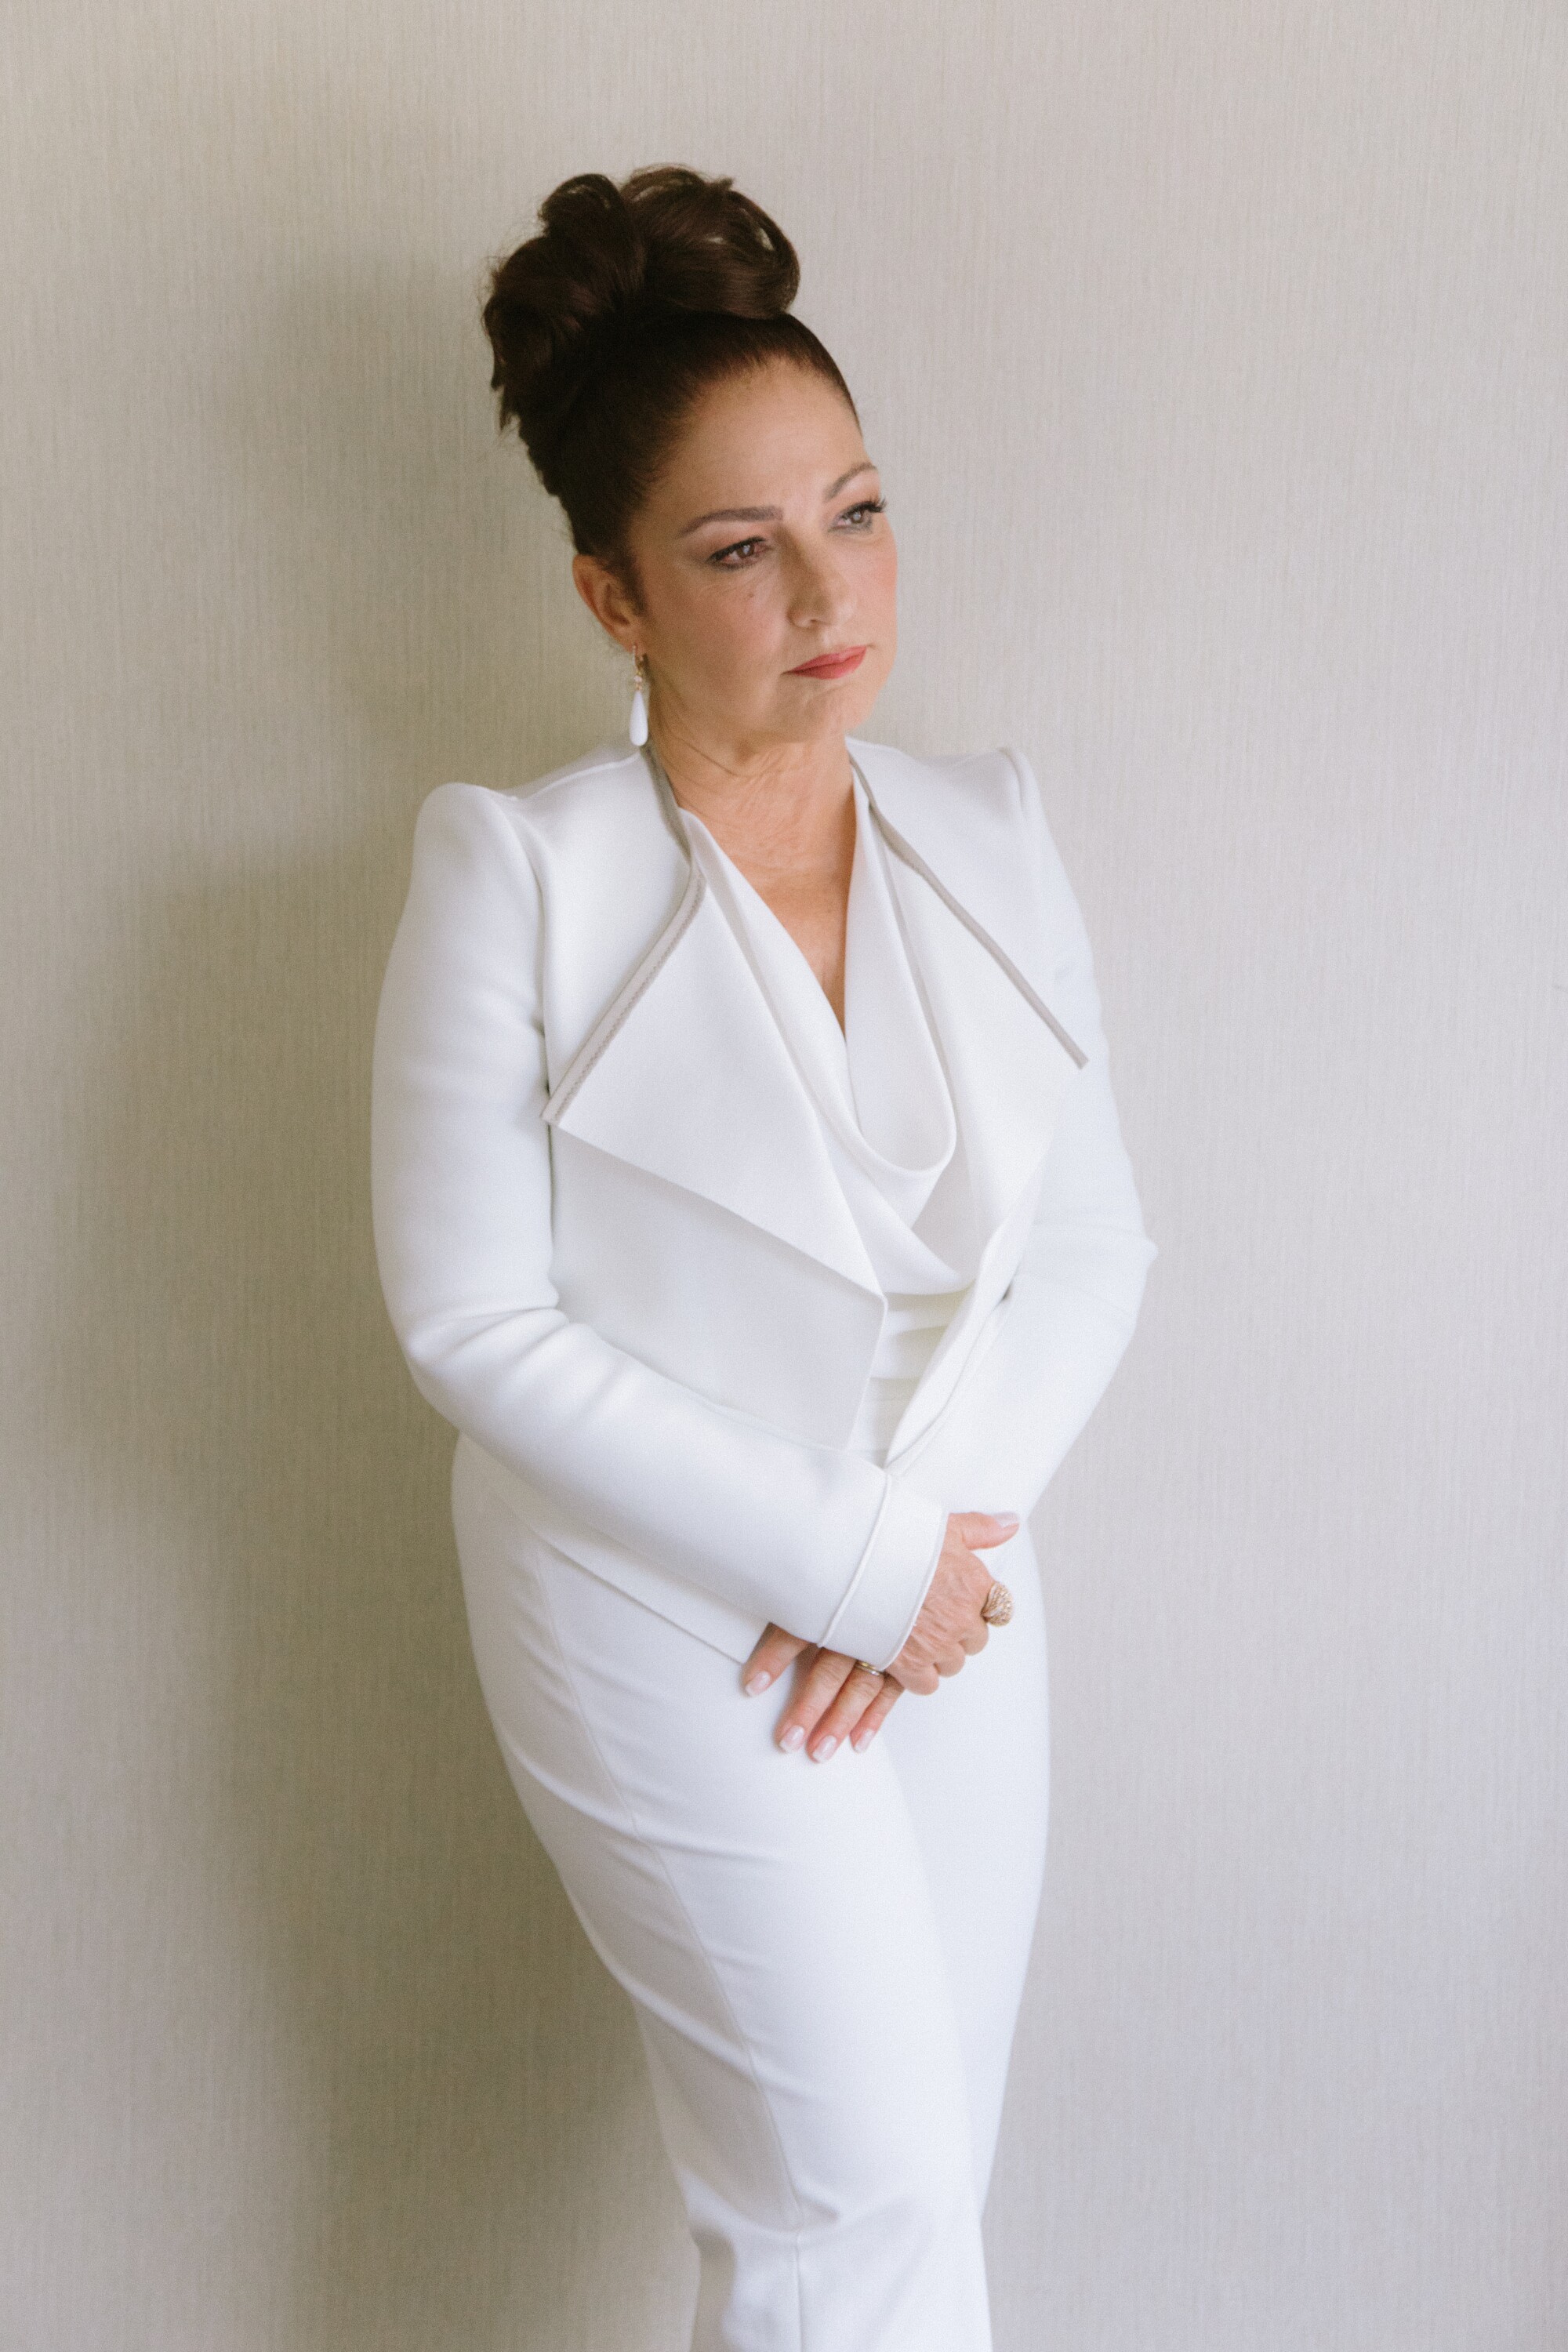 Gloria Estefan stars in HBO Max's remake of "Father of the Bride."